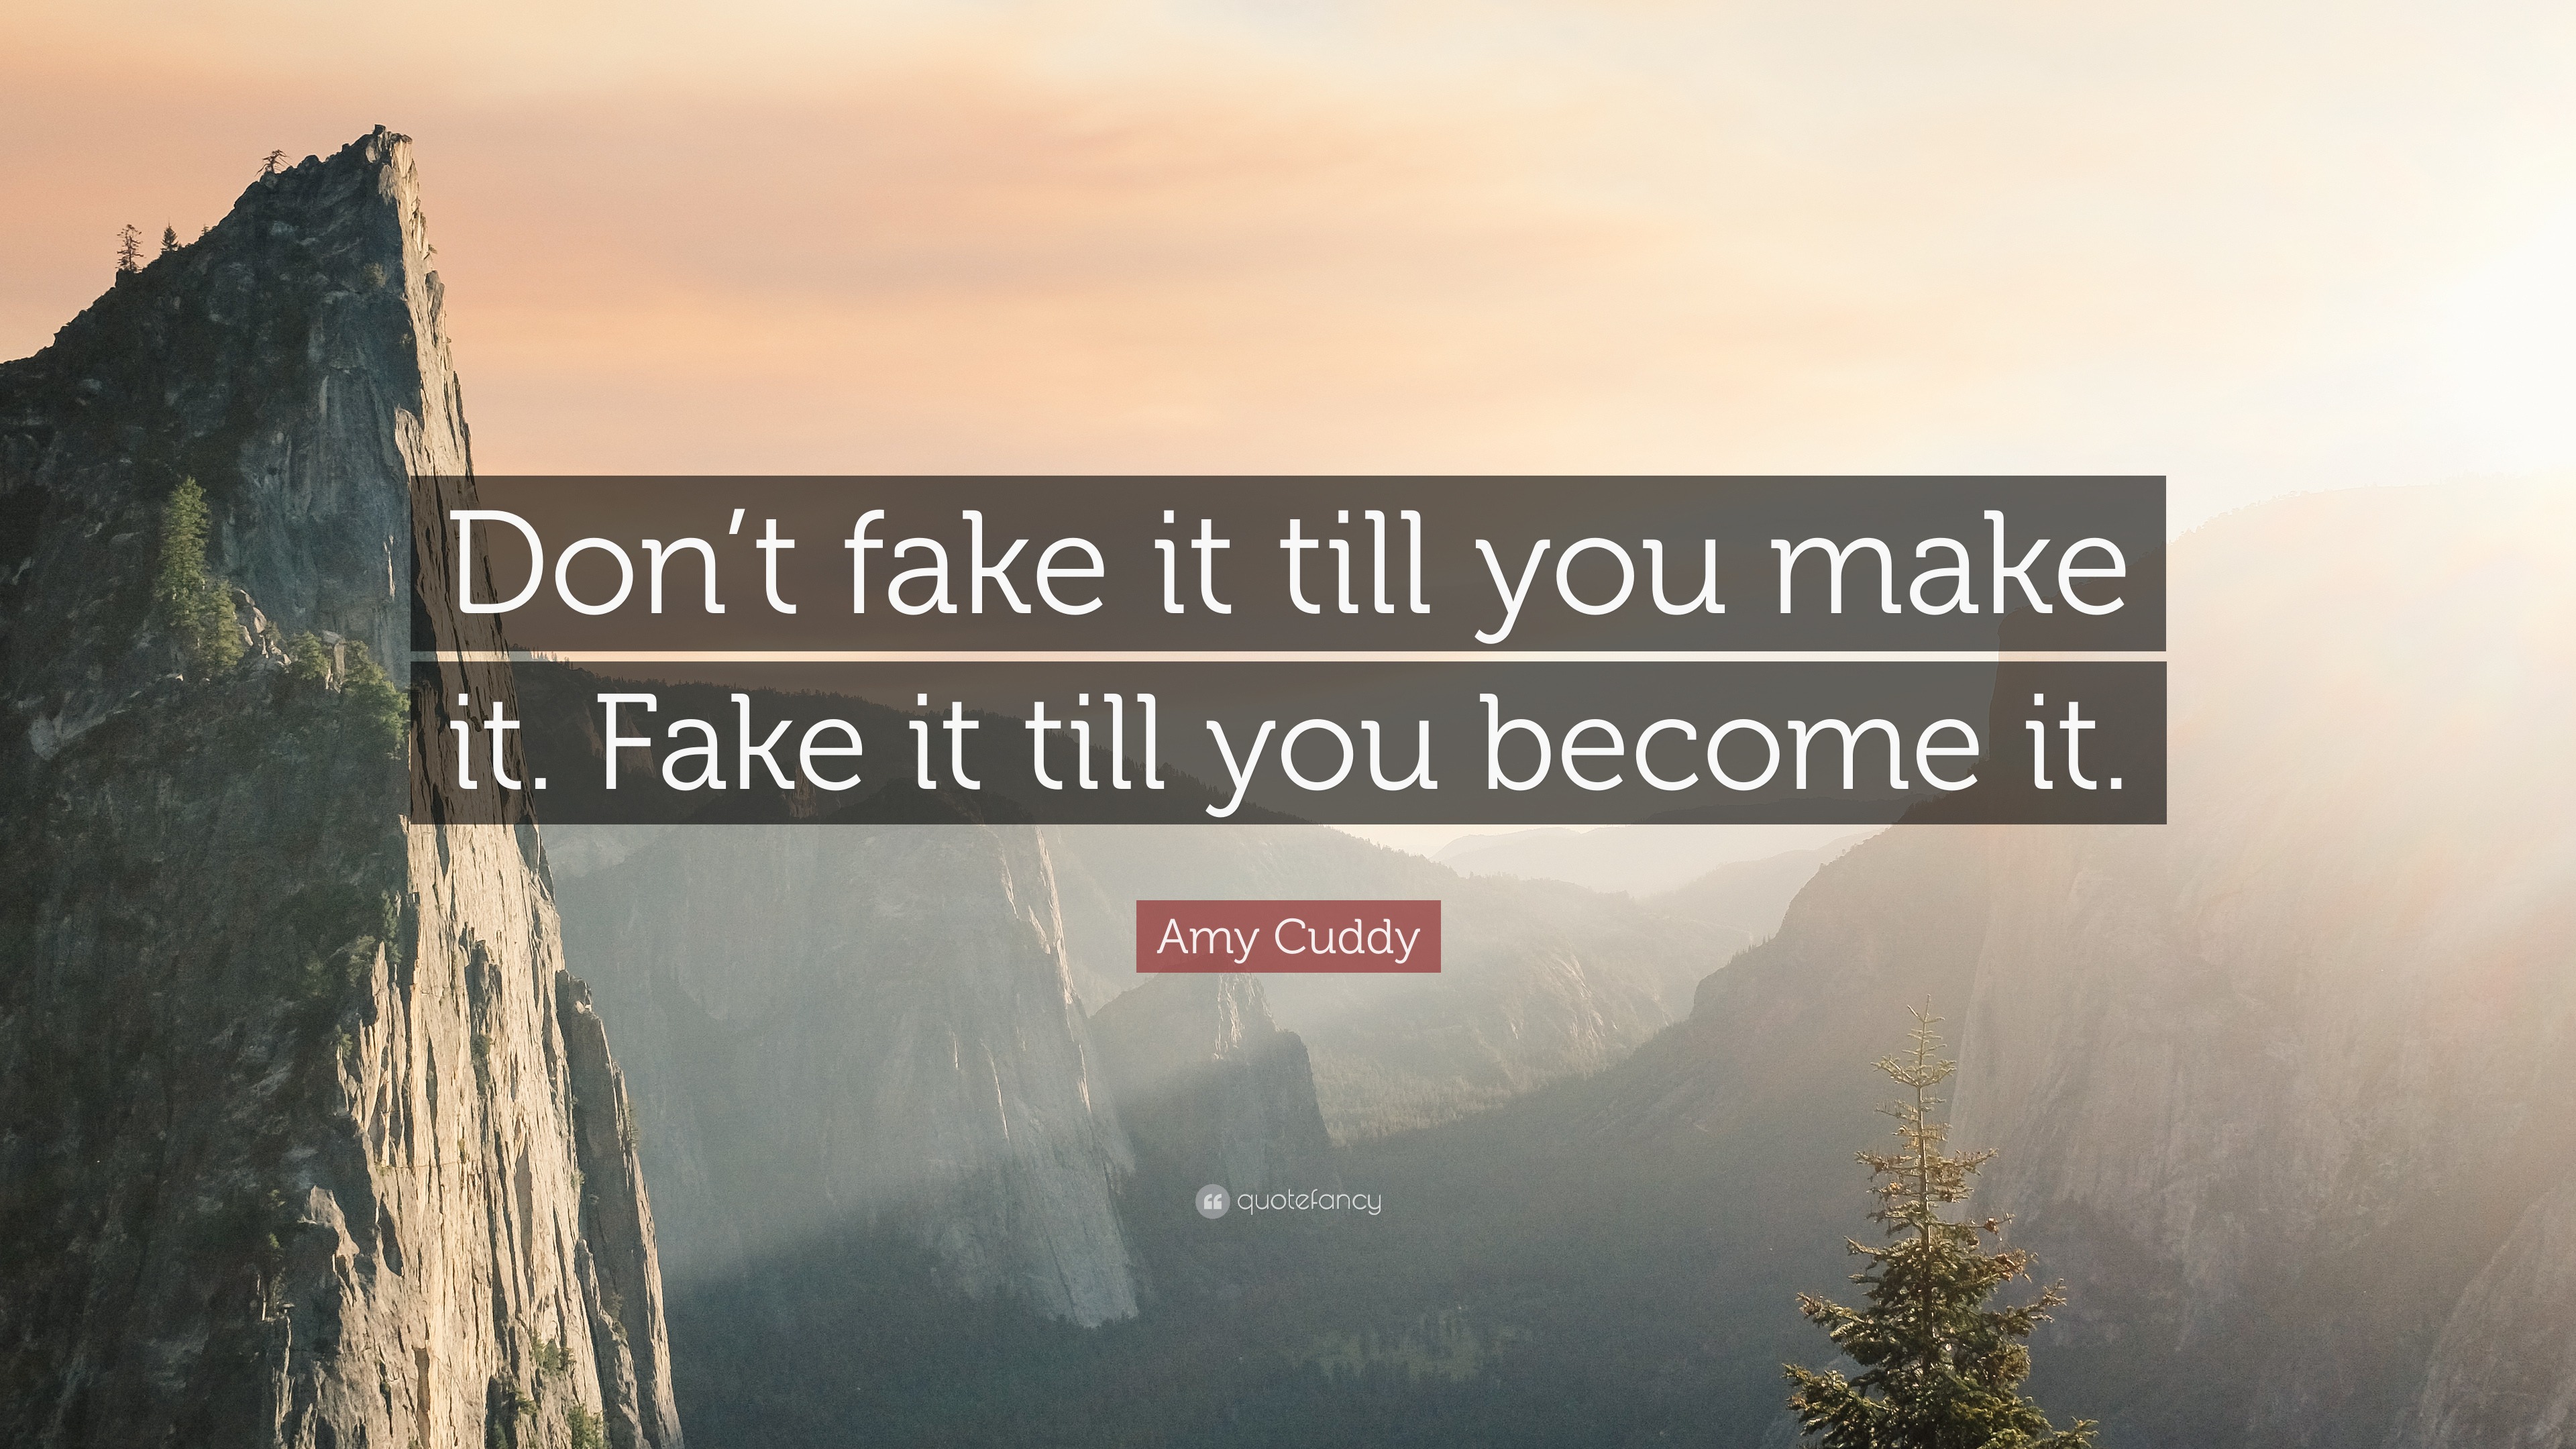 fake till don cuddy amy quotes quote become